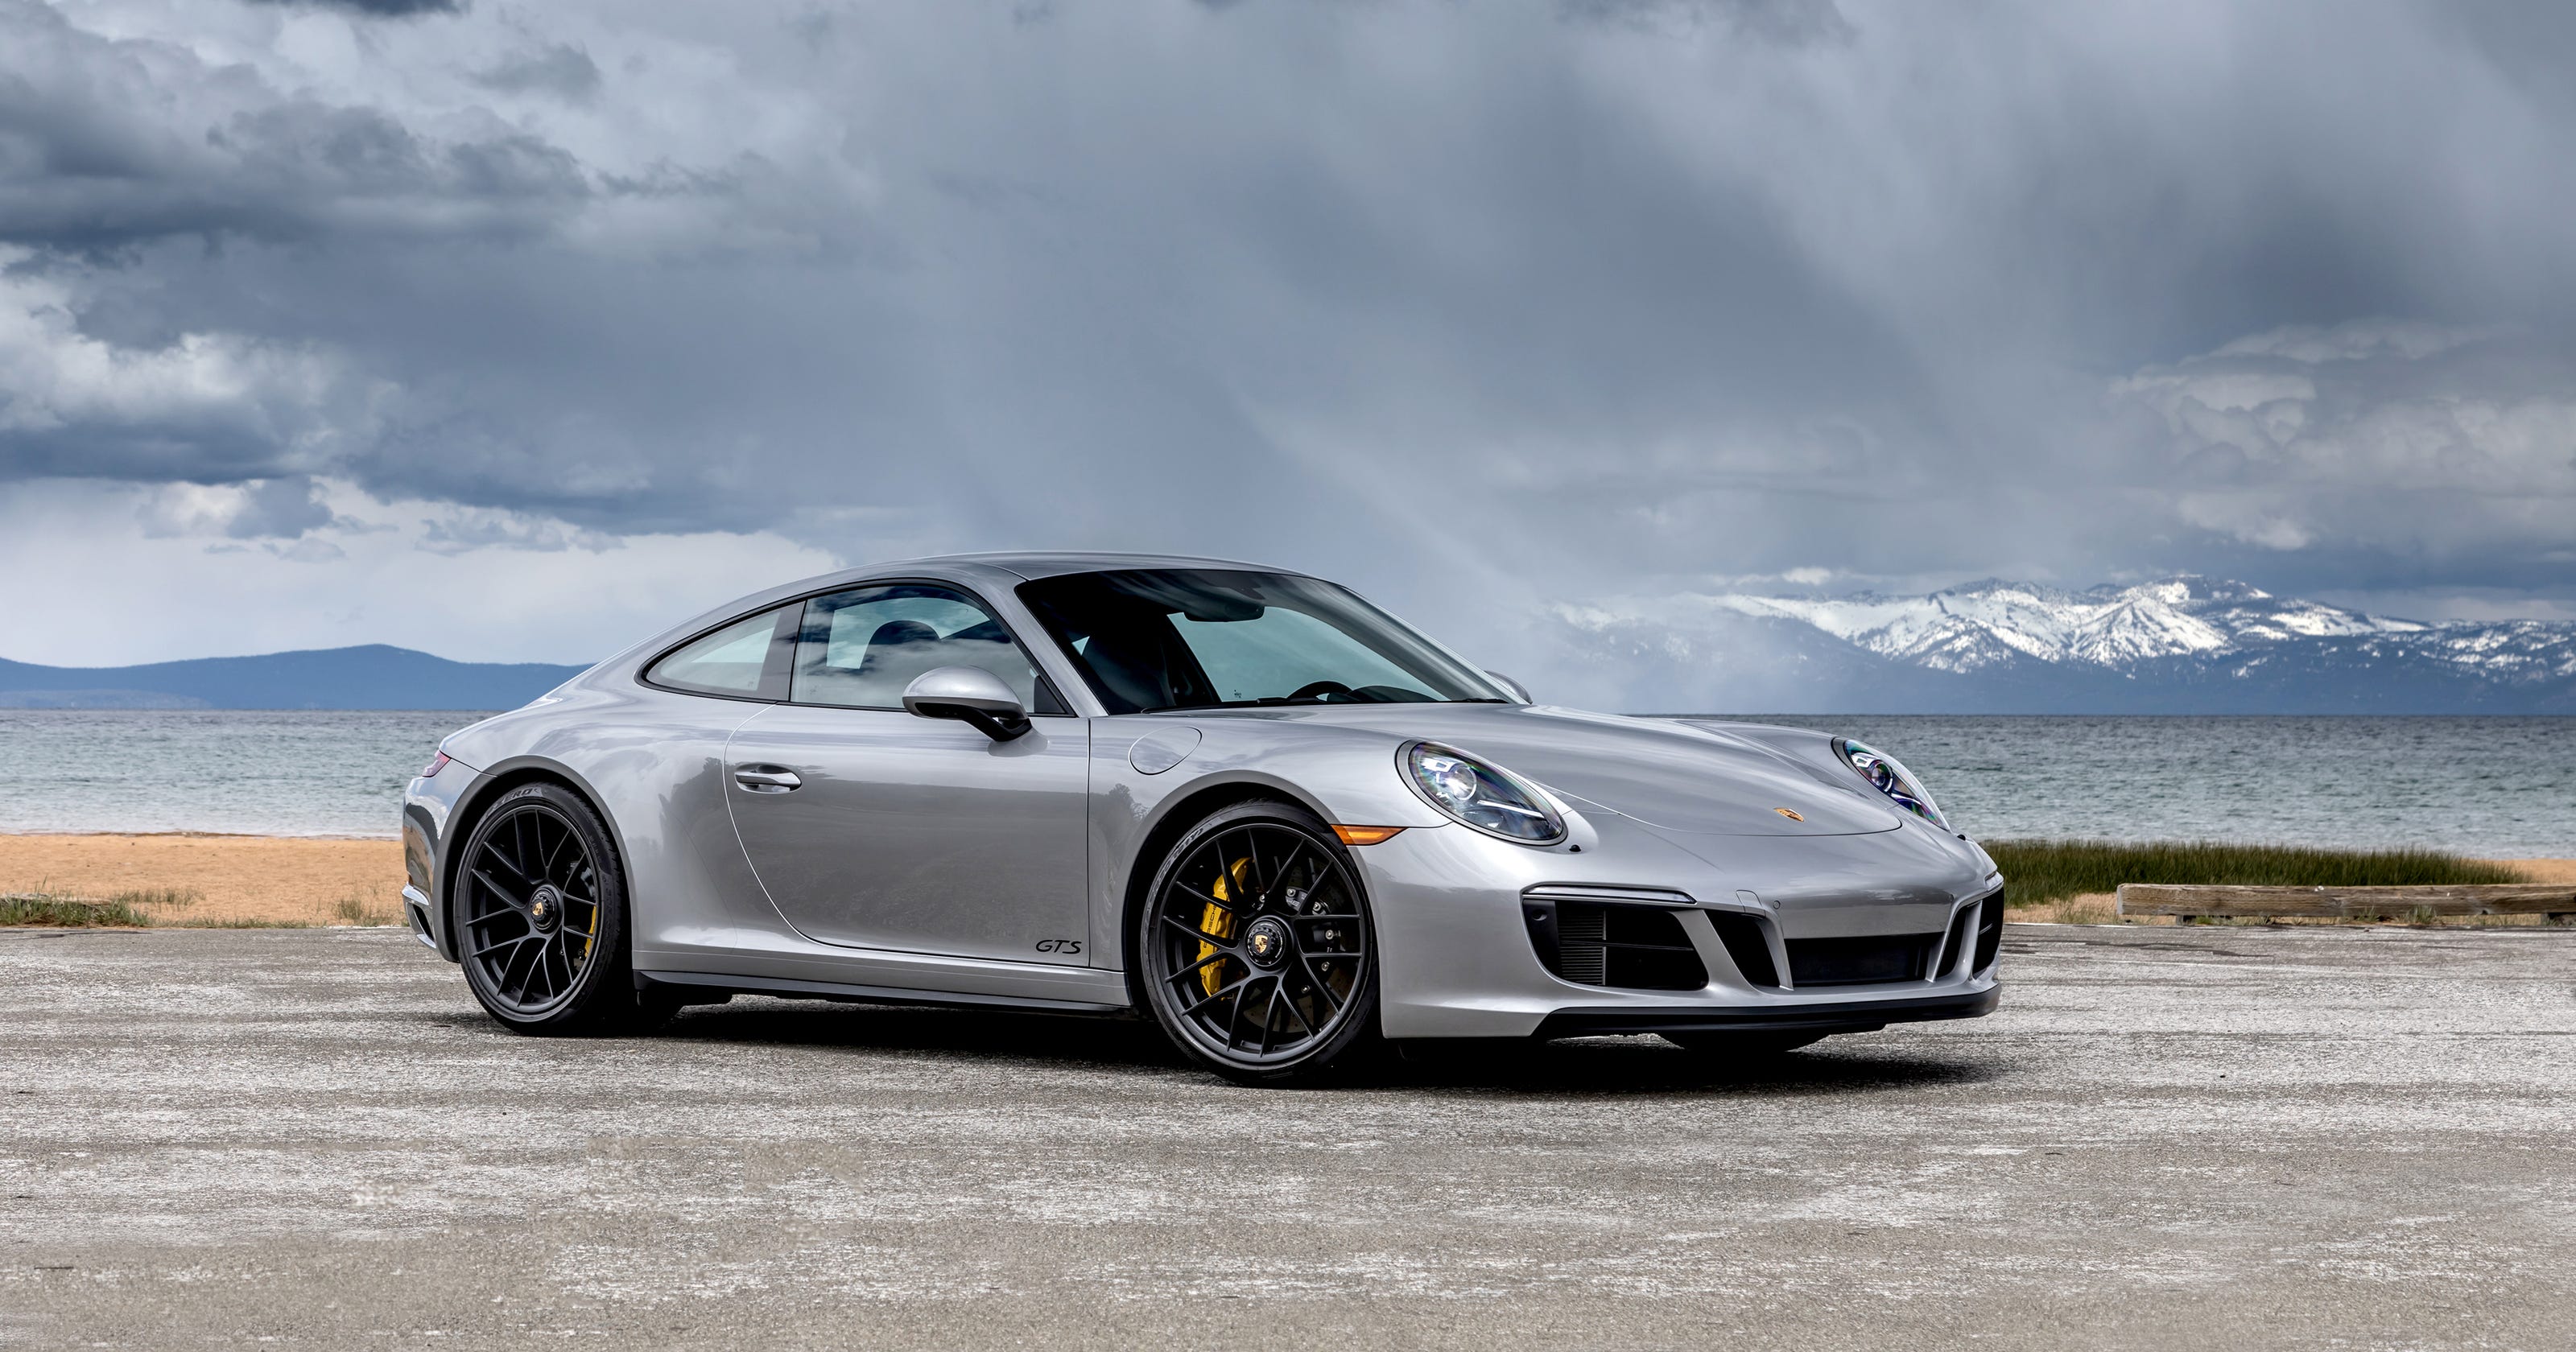 2017 Carrera Gts May Be Porsches Best 911